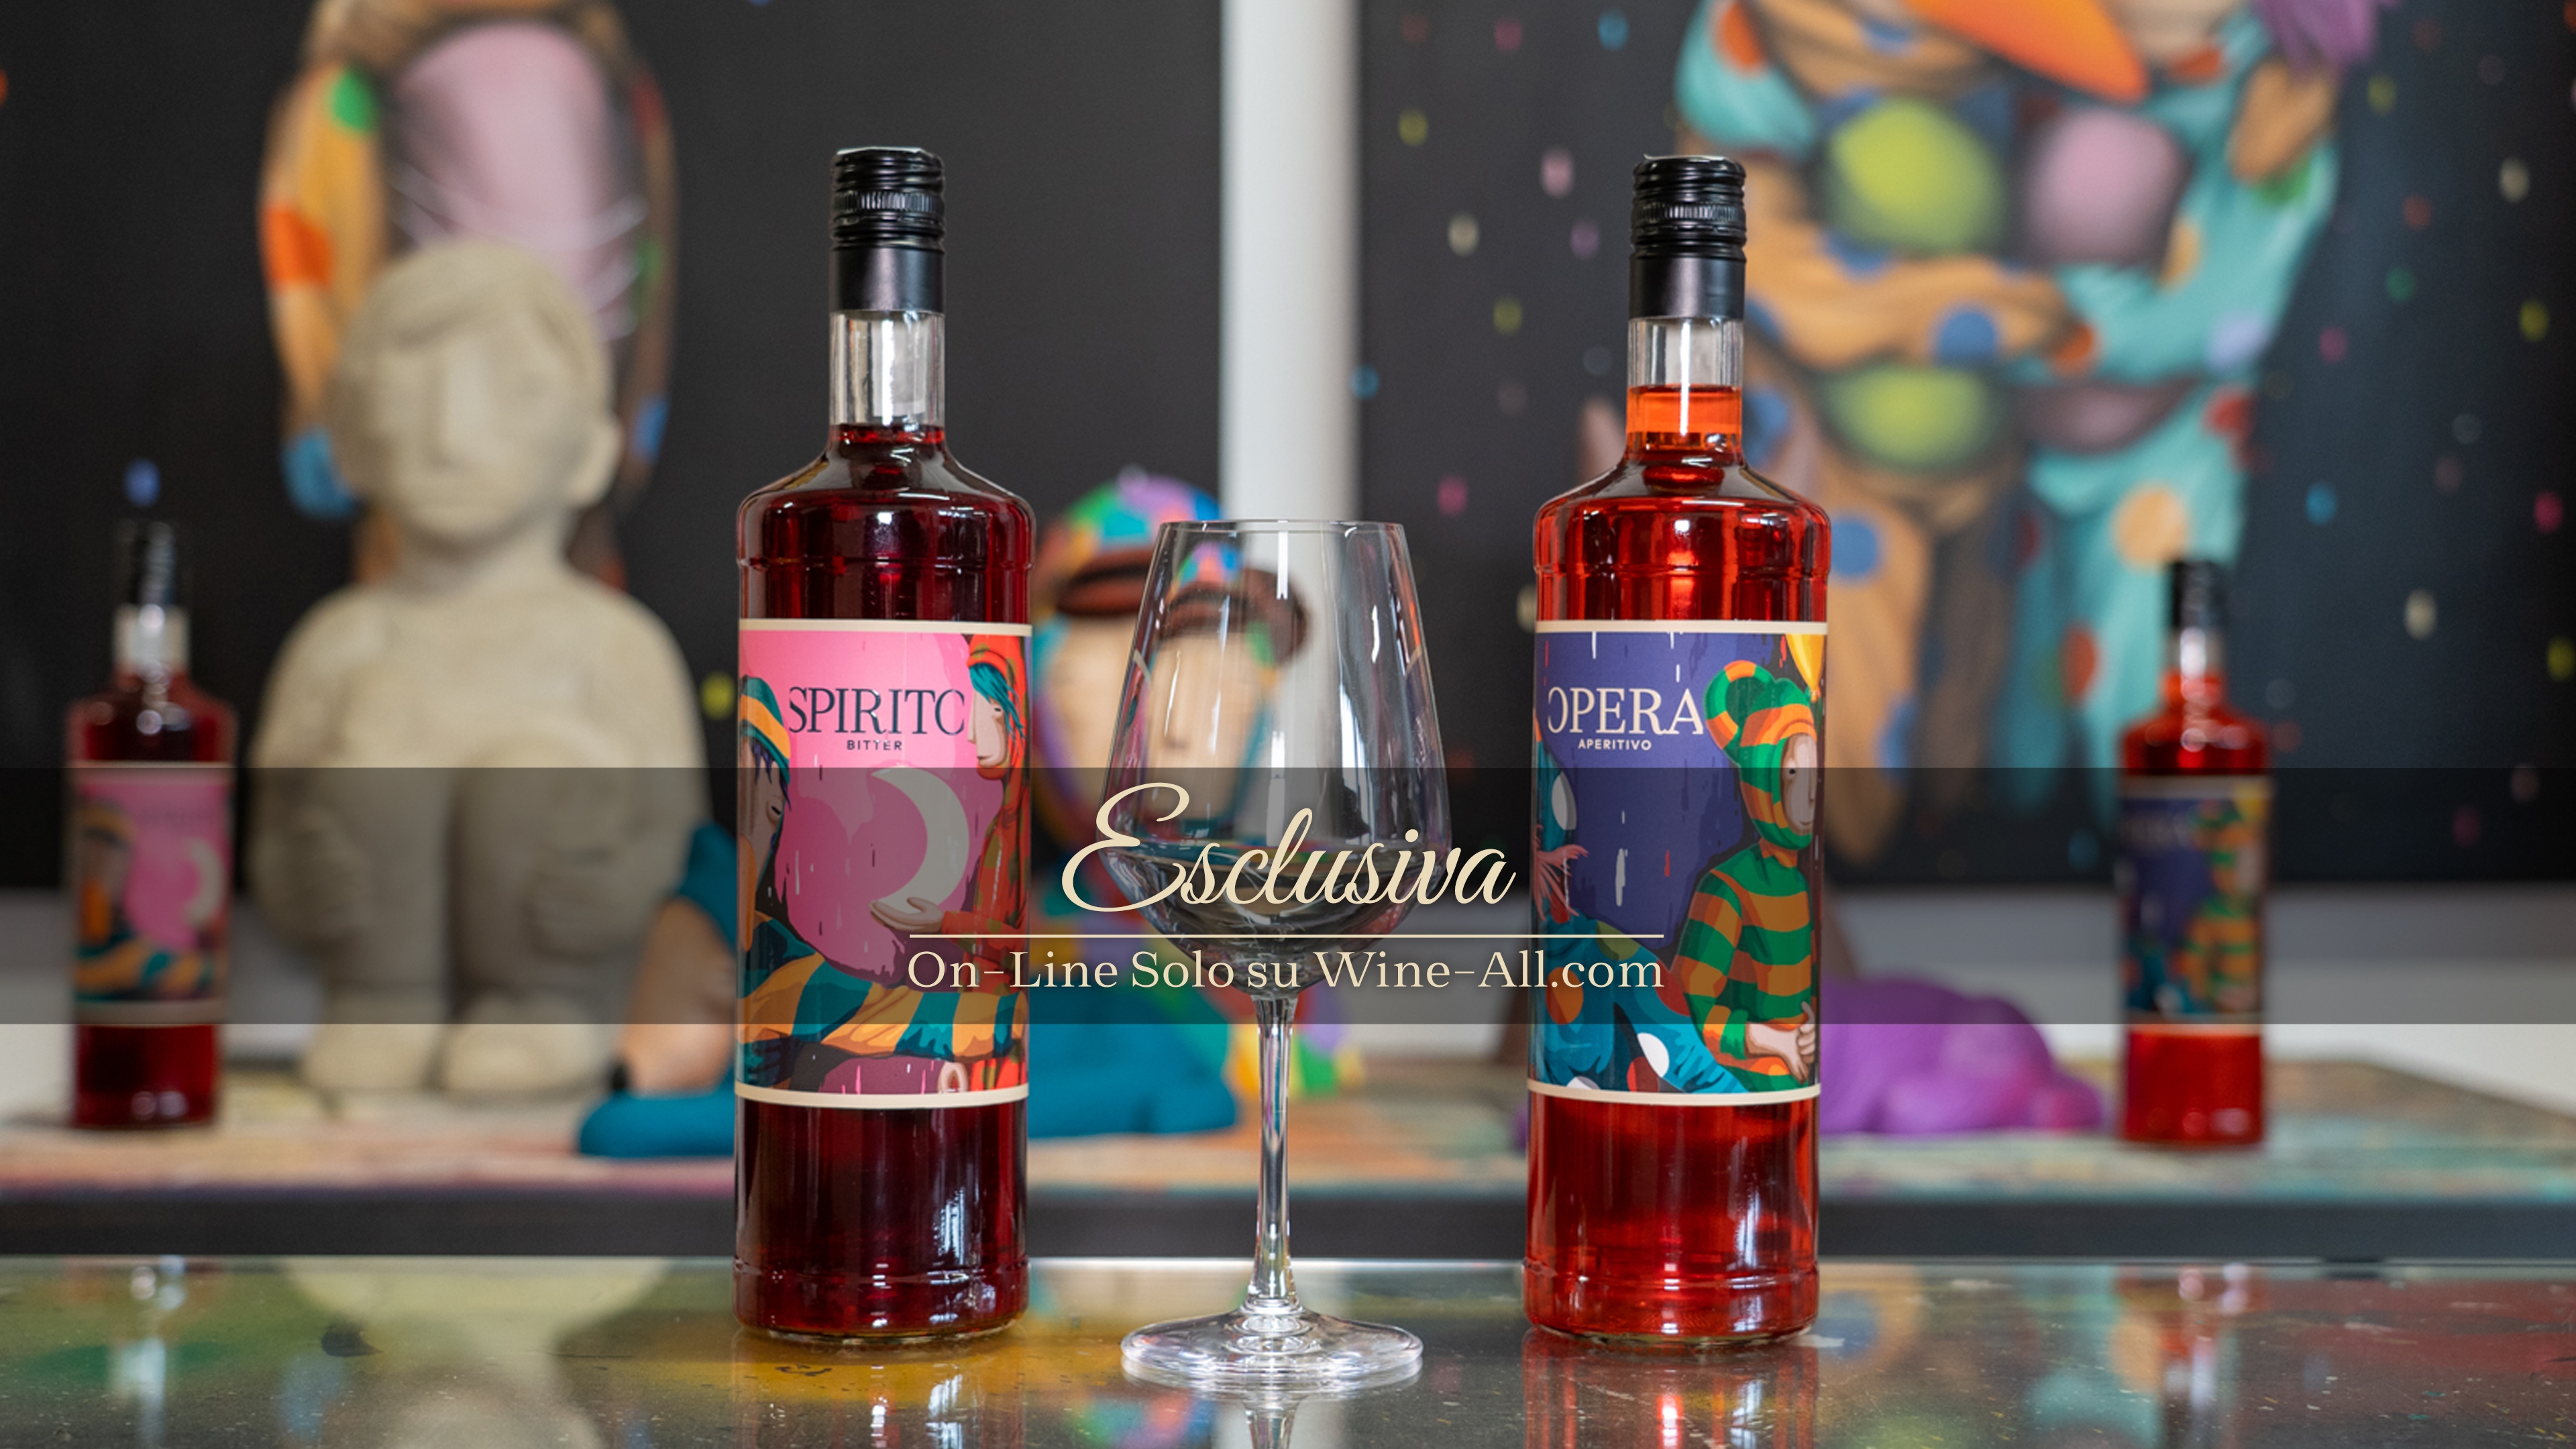 OPERA APERITIF AND BITTER SPIRIT WITH LABELING BY TONY GALLO